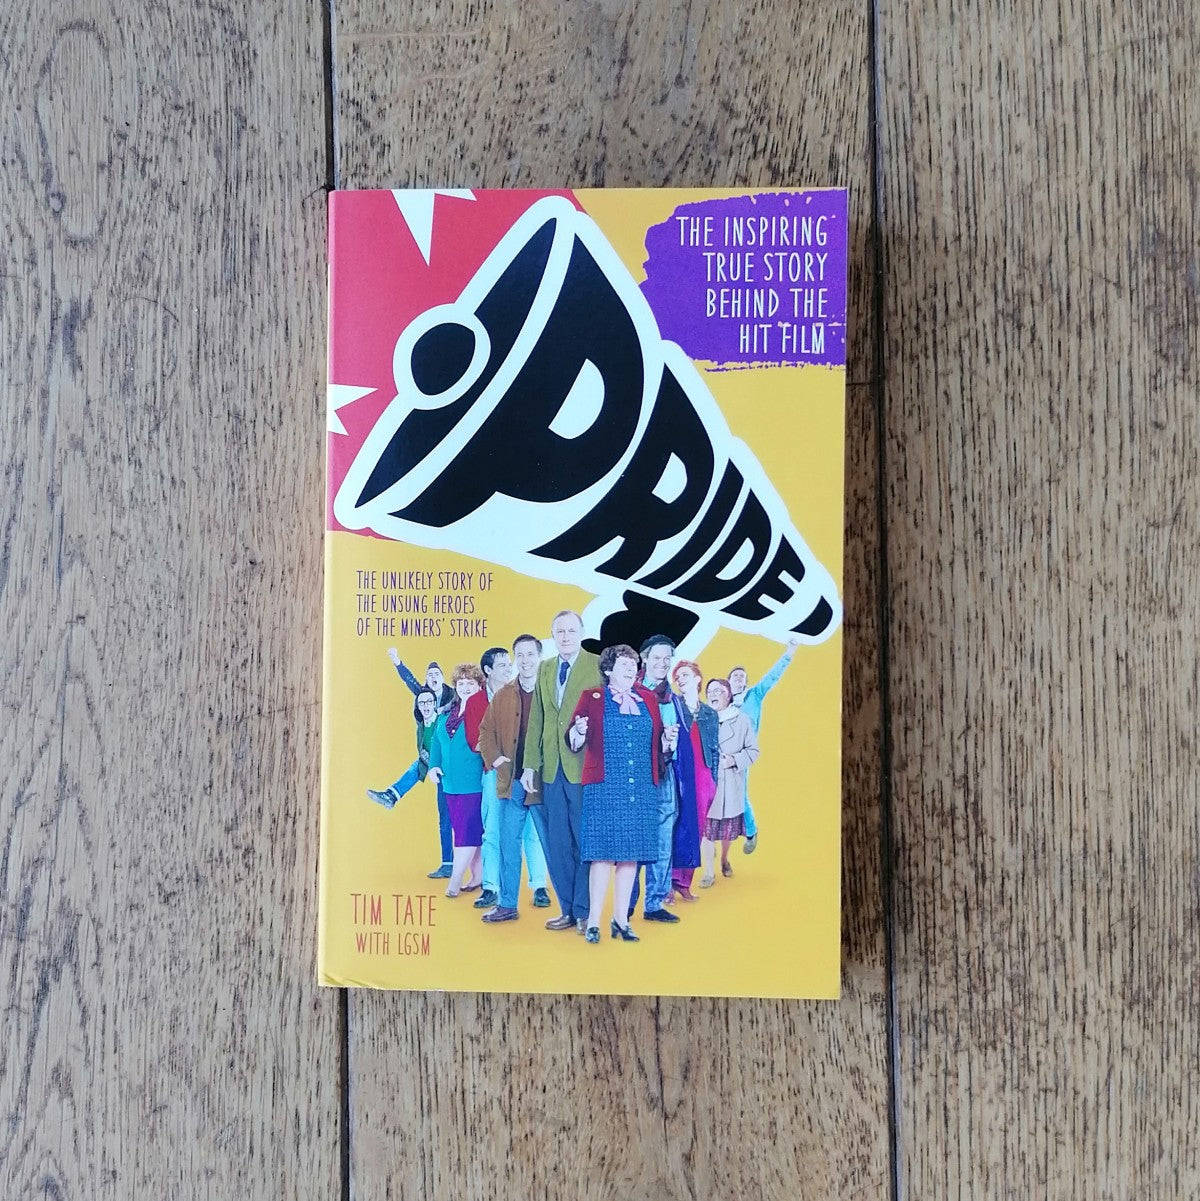 Pride: The Unlikely Story of the True Heroes of the Miners' Strike by Tim Tate with LGSM | Image courtesy of People's History Museum shop